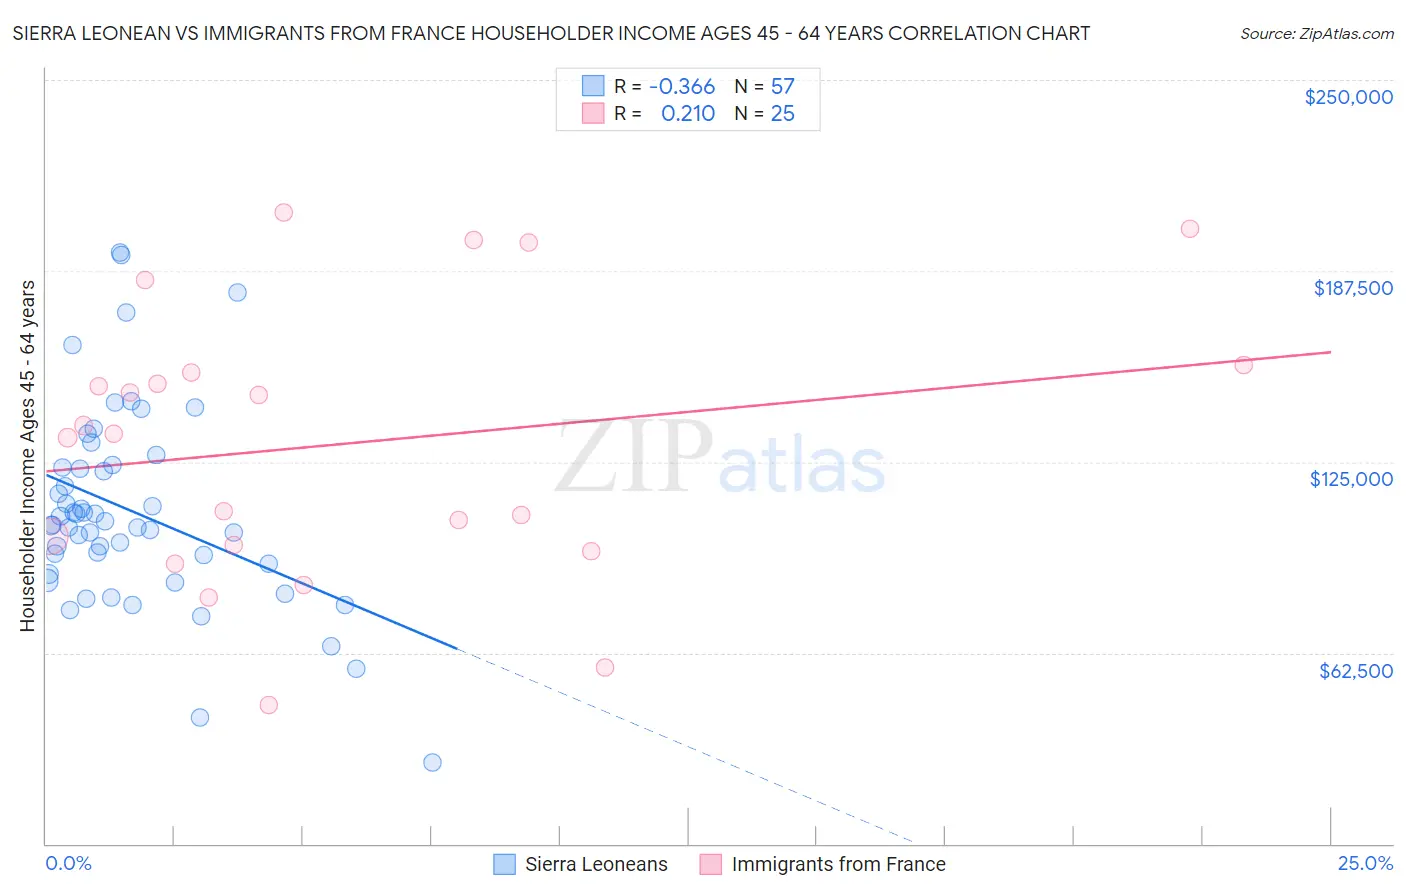 Sierra Leonean vs Immigrants from France Householder Income Ages 45 - 64 years